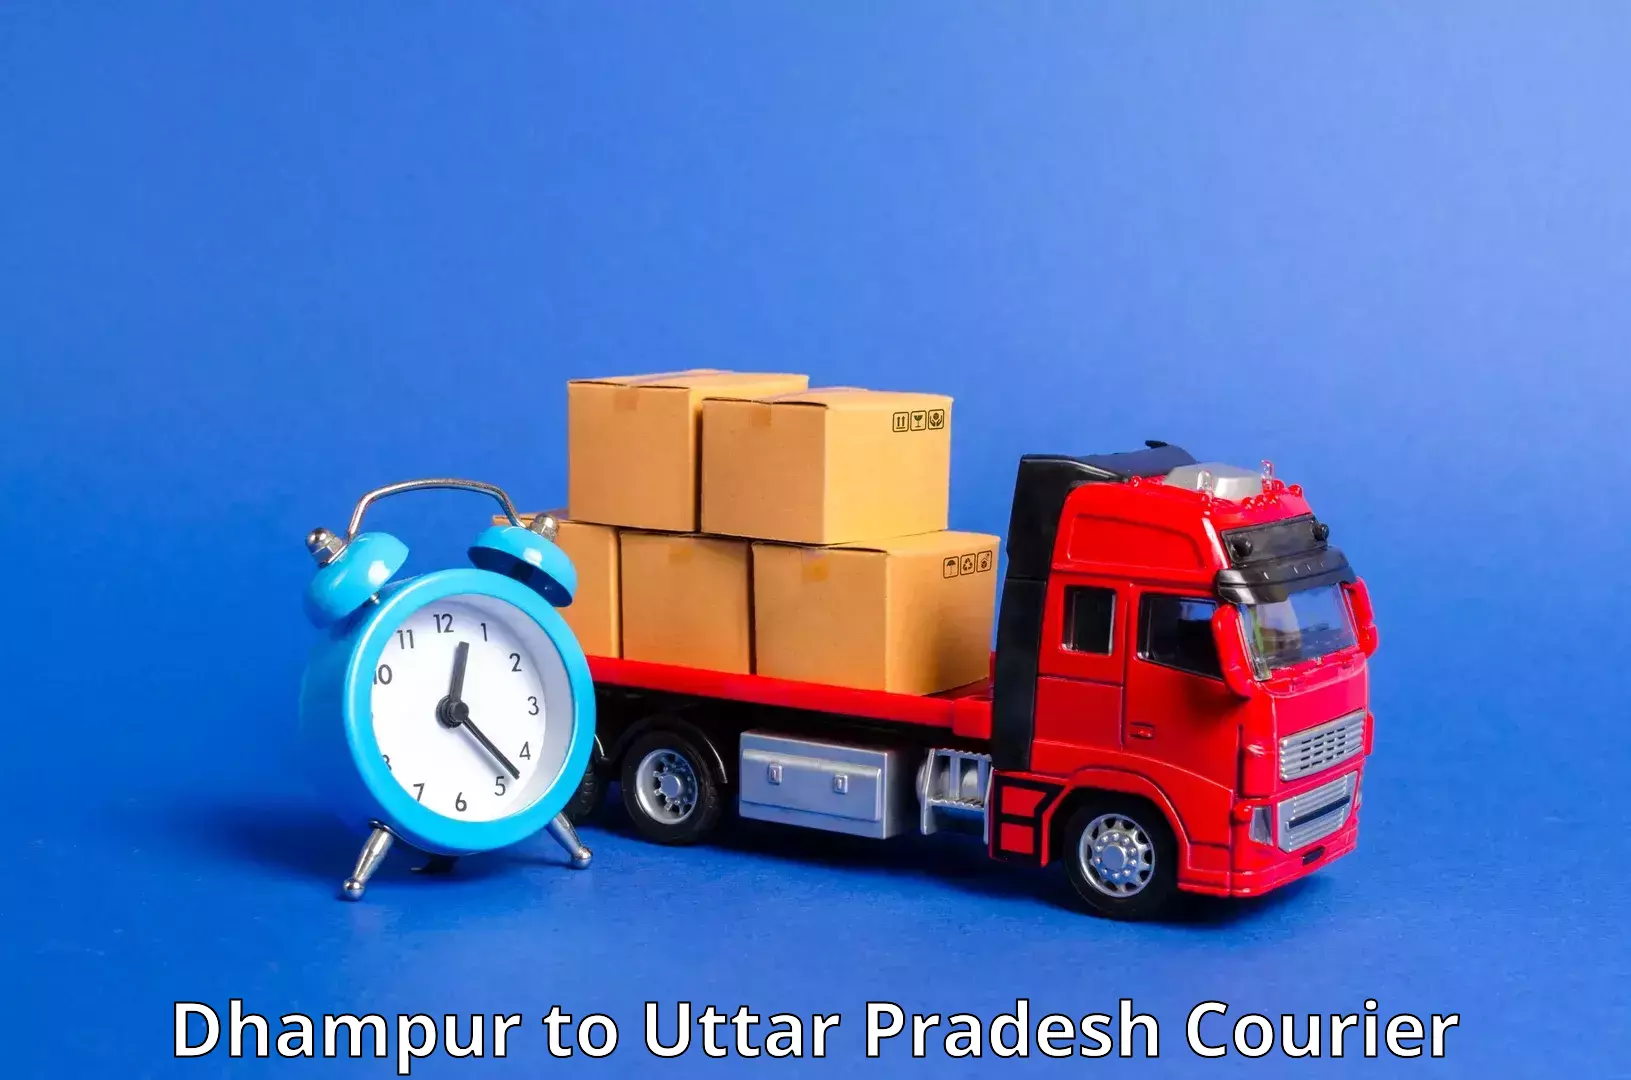 Smart courier technologies Dhampur to Dayalbagh Educational Institute Agra